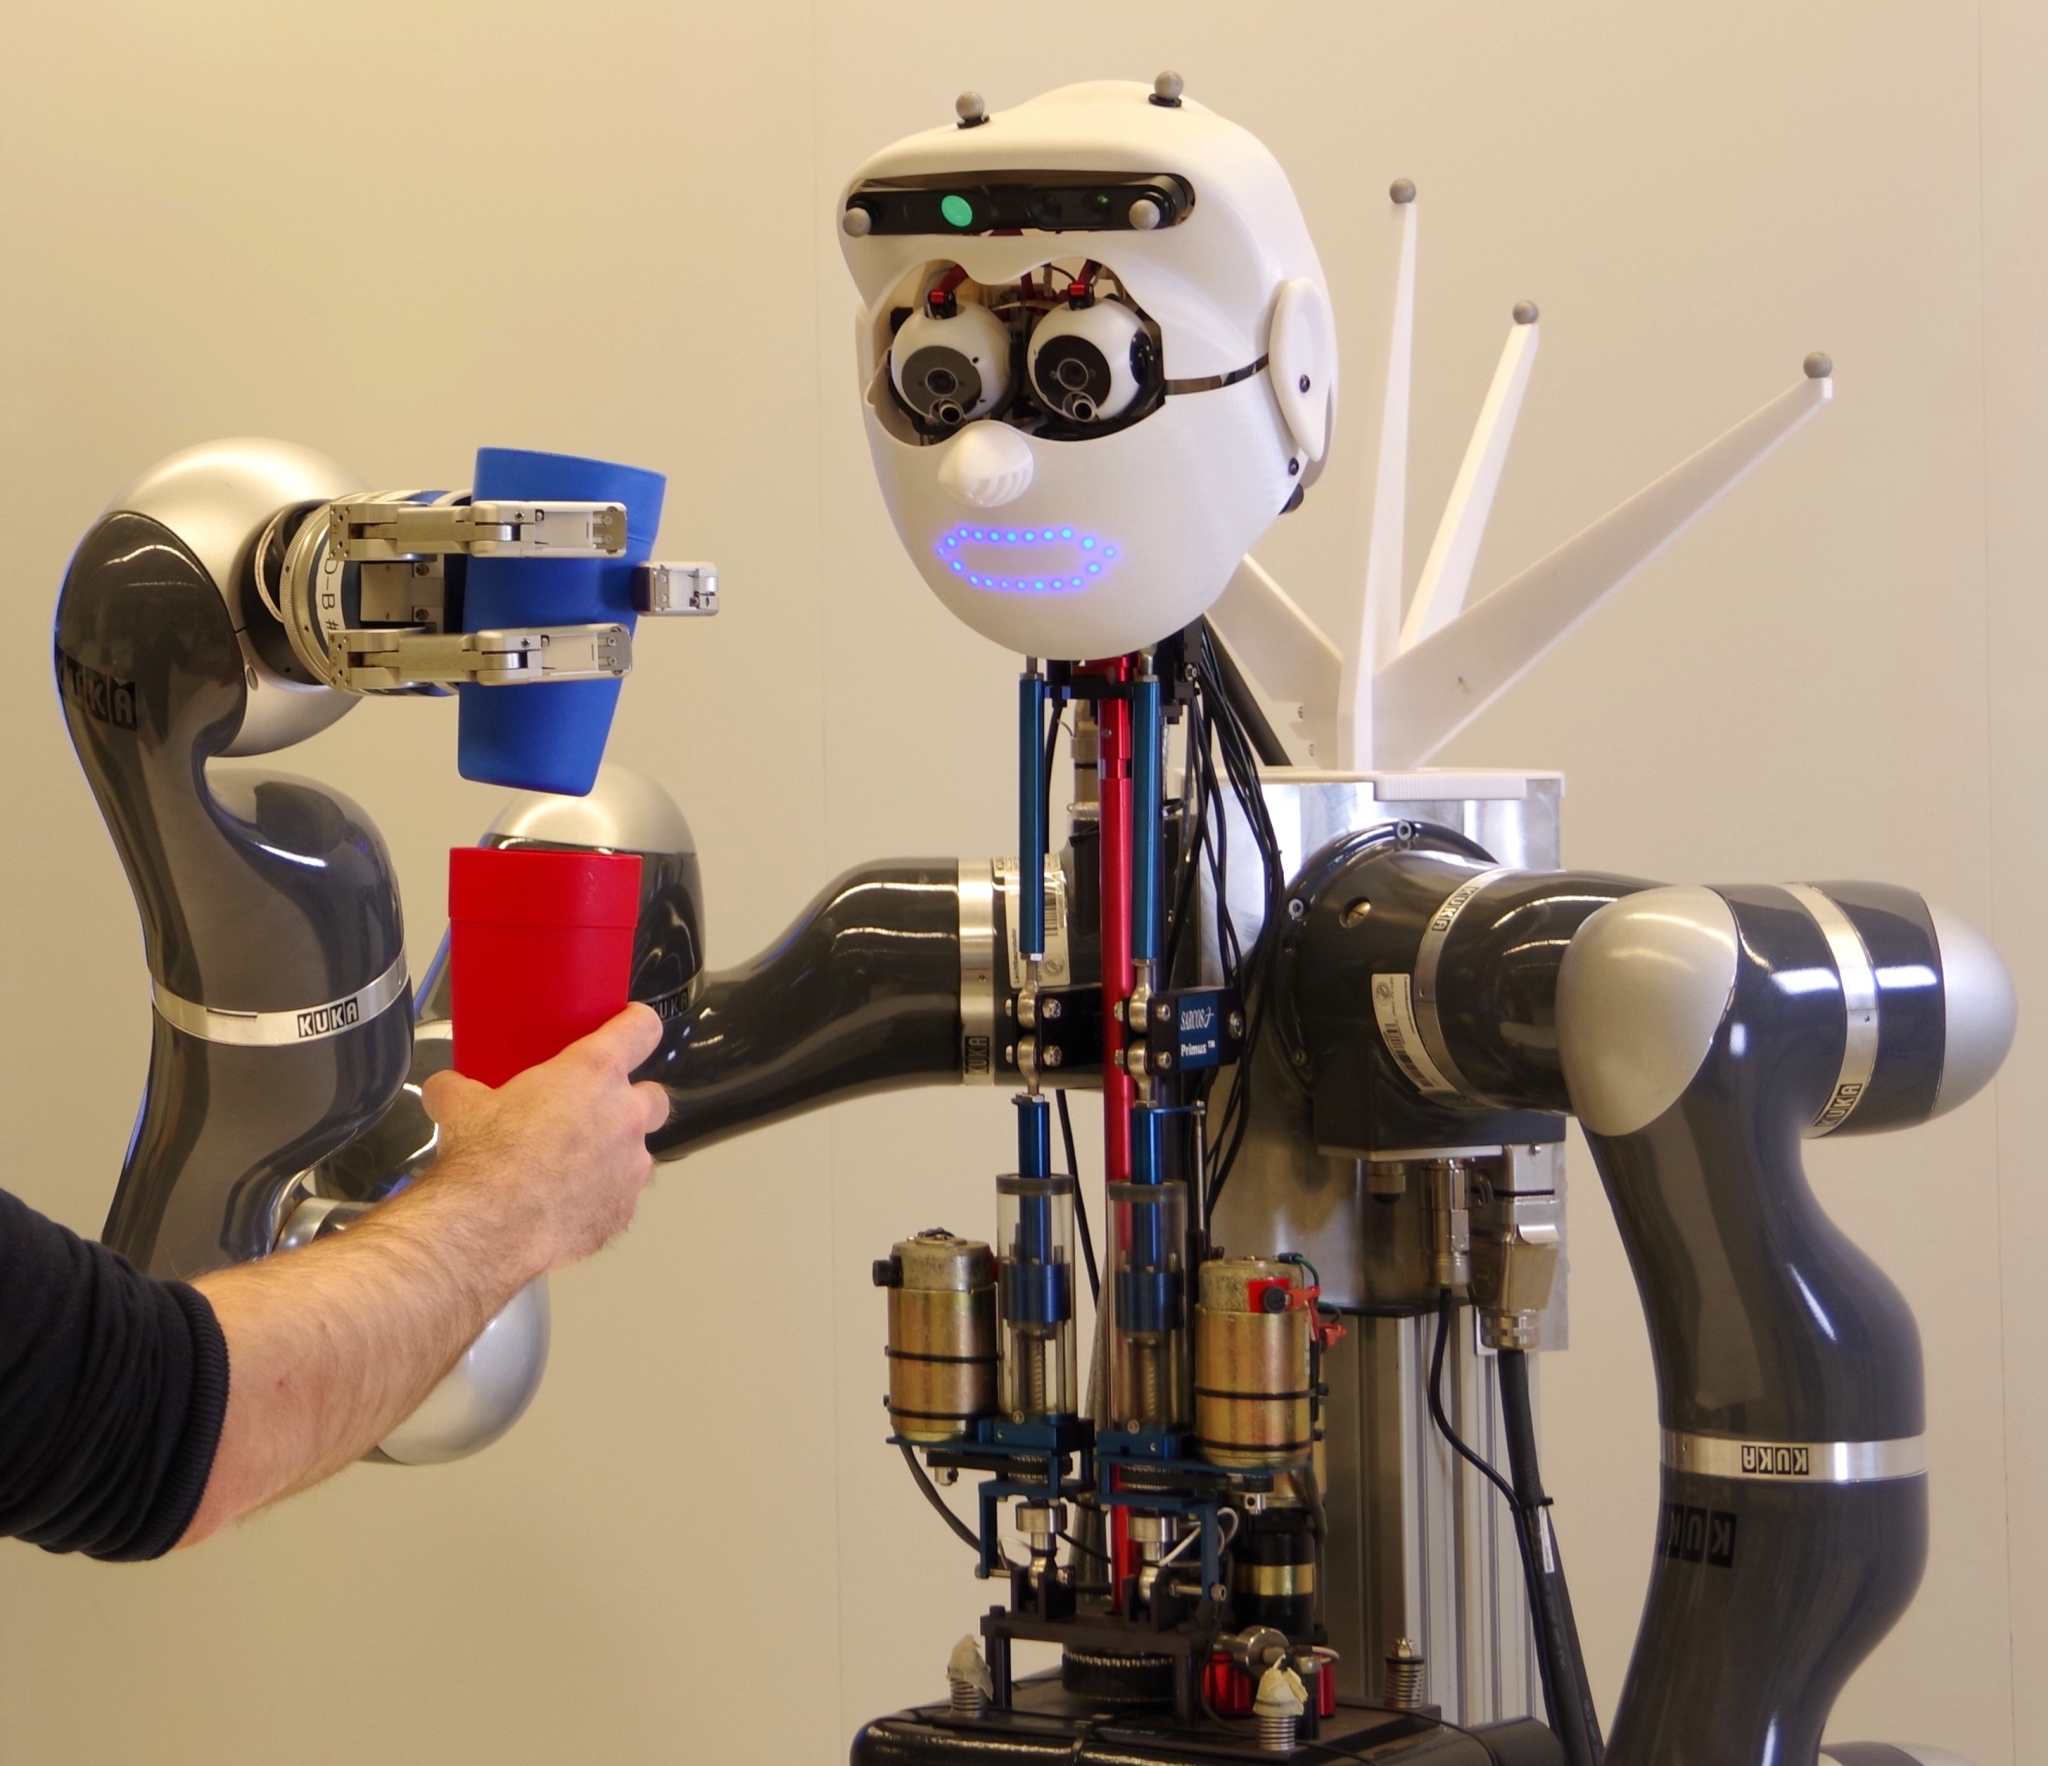 The robot Apollo in the laboratory: it is holding a blue cup and is offered a red cup by a human hand.